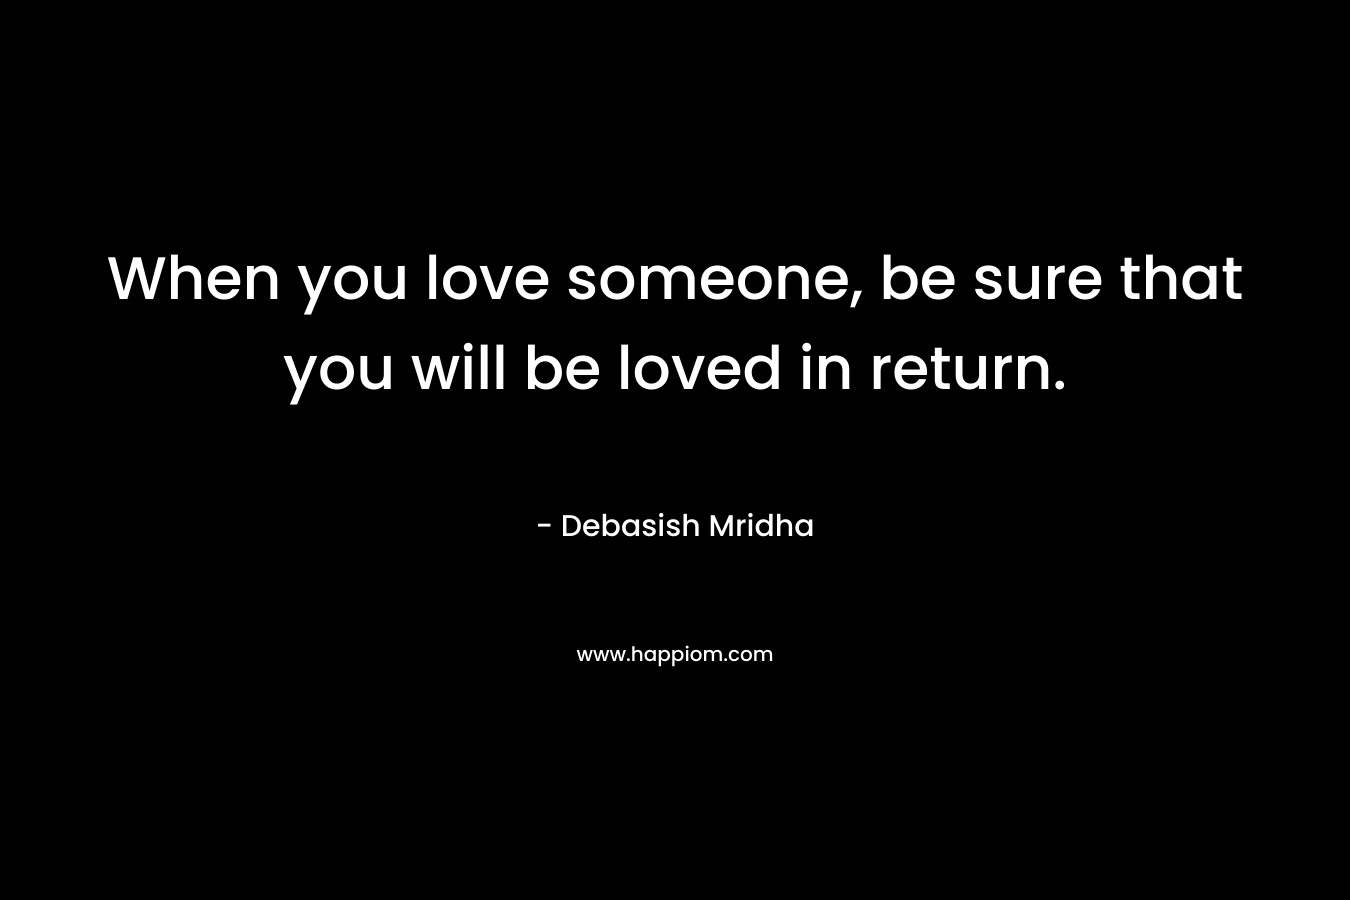 When you love someone, be sure that you will be loved in return.